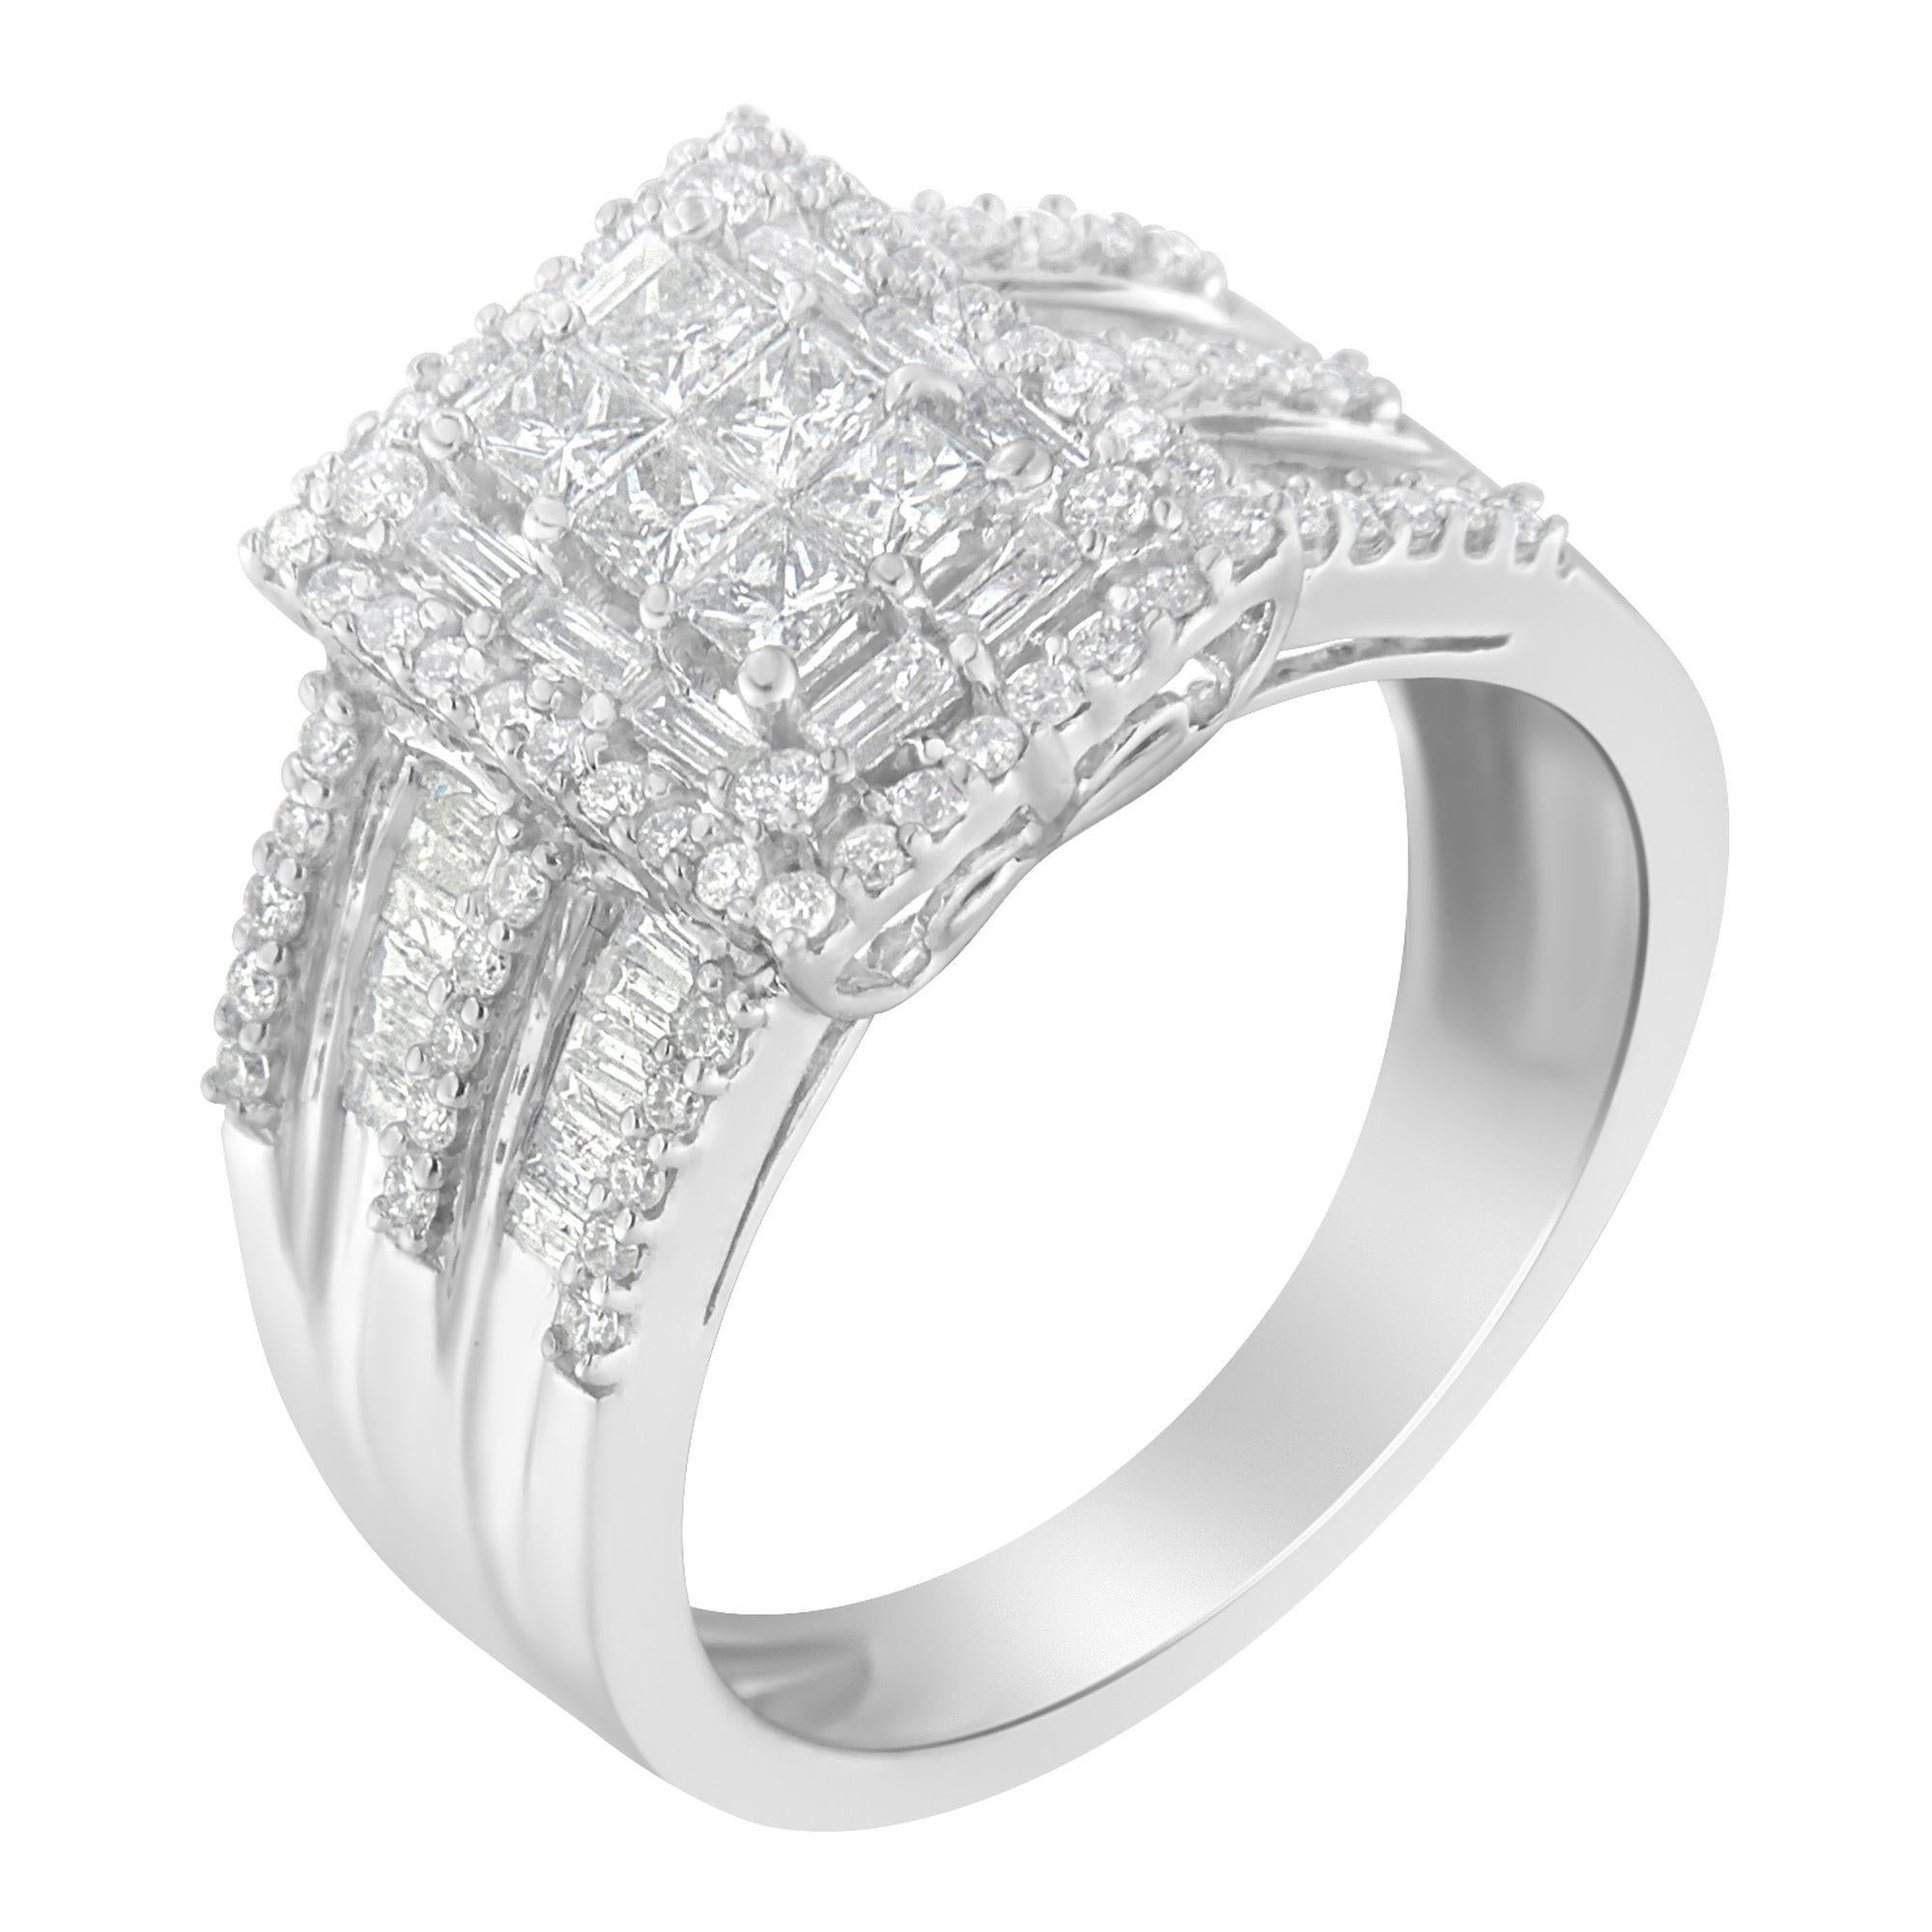 10K White Gold 1.0 Carat Diamond Cluster Ring In New Condition For Sale In New York, NY